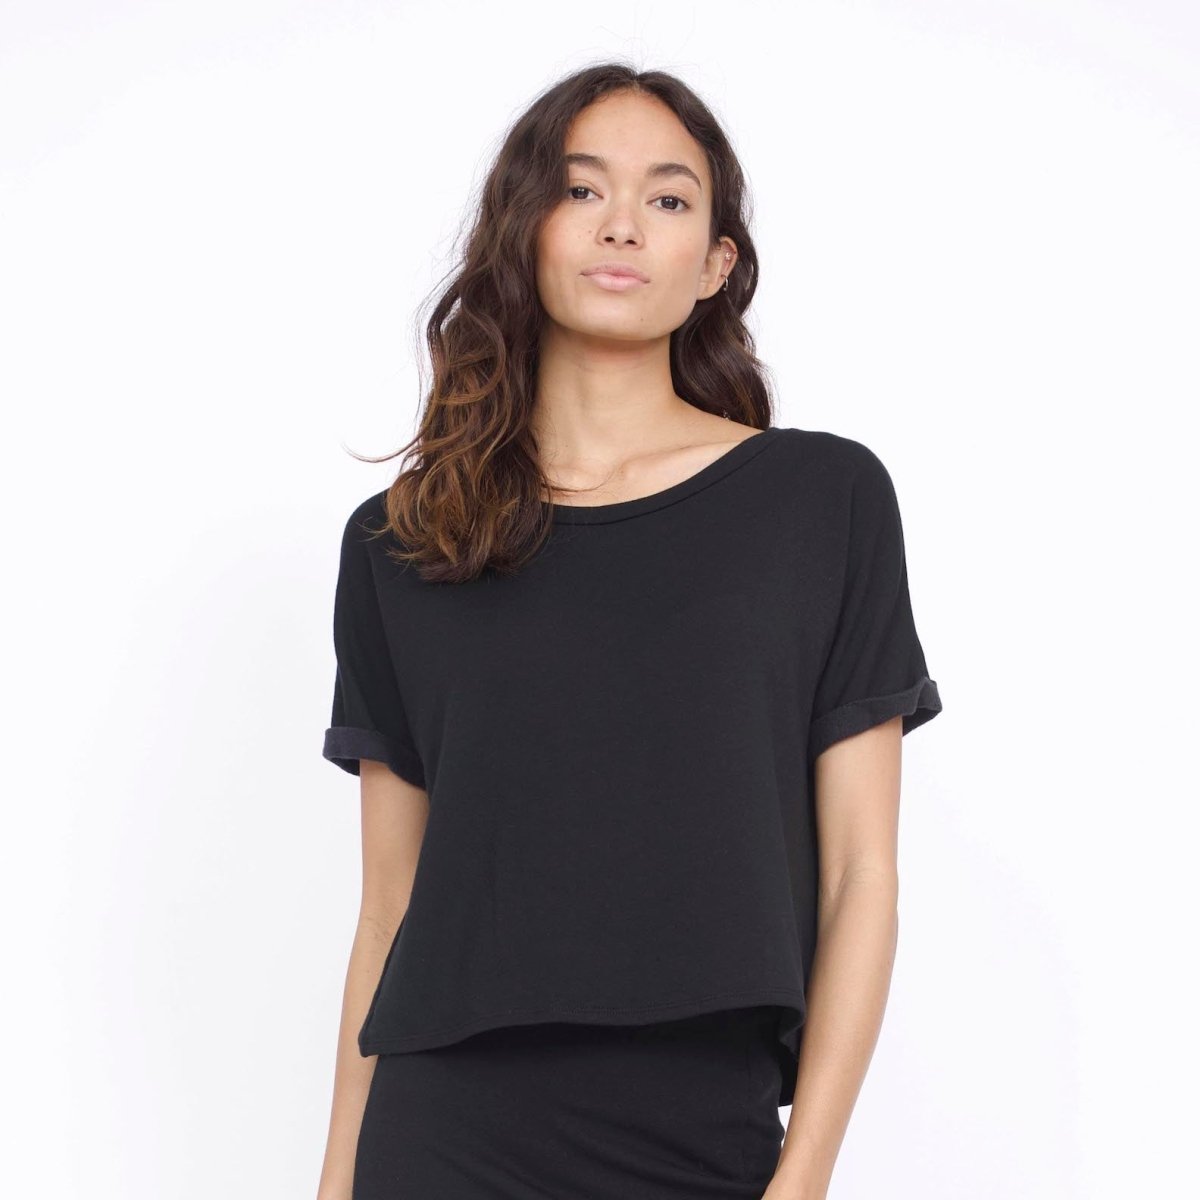 Rolled cuff tee with a slightly longer back in Black. Fabric and top made in Los Angeles, CA by Corinne Collection.